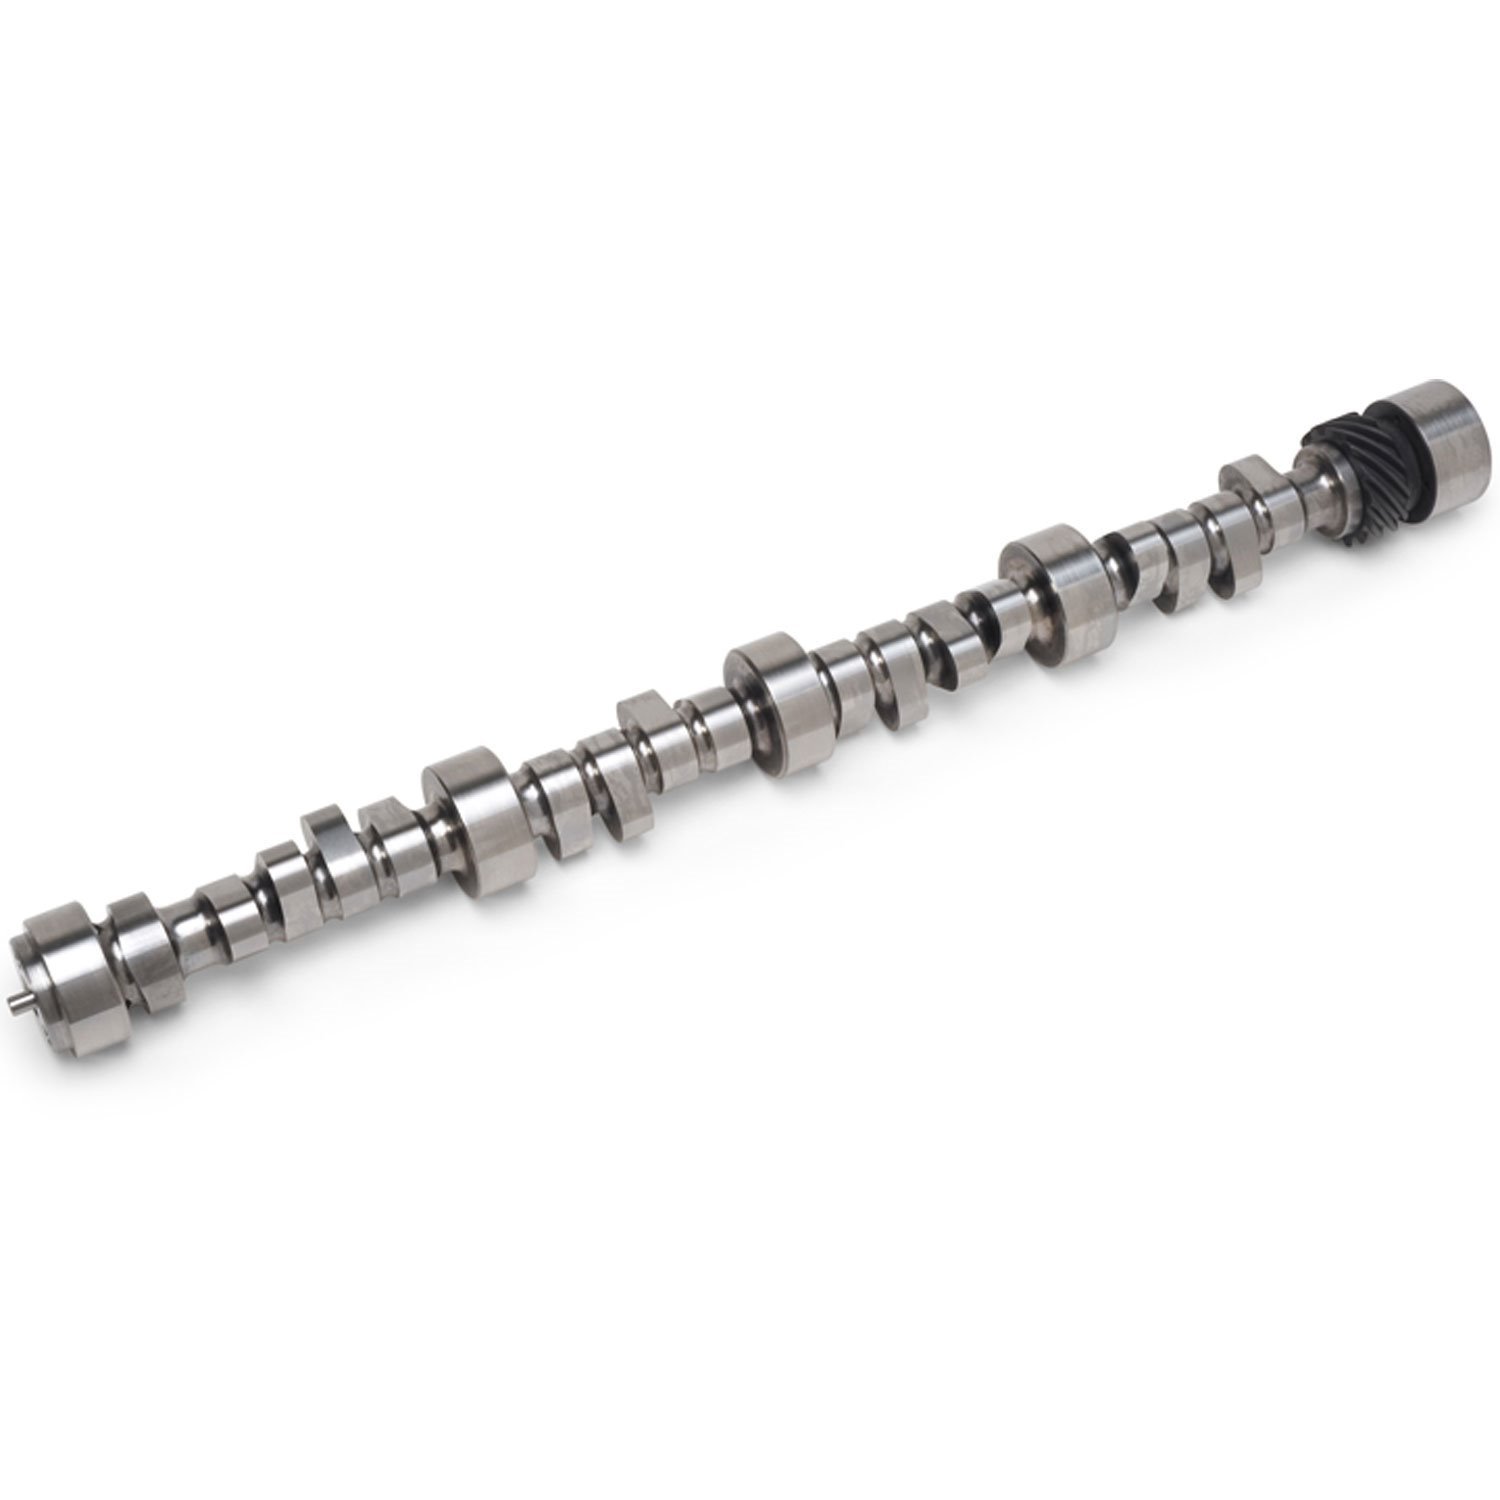 Rollin' Thunder Hydraulic Roller Camshaft for 1987-Later Small Block Chevy 283-400